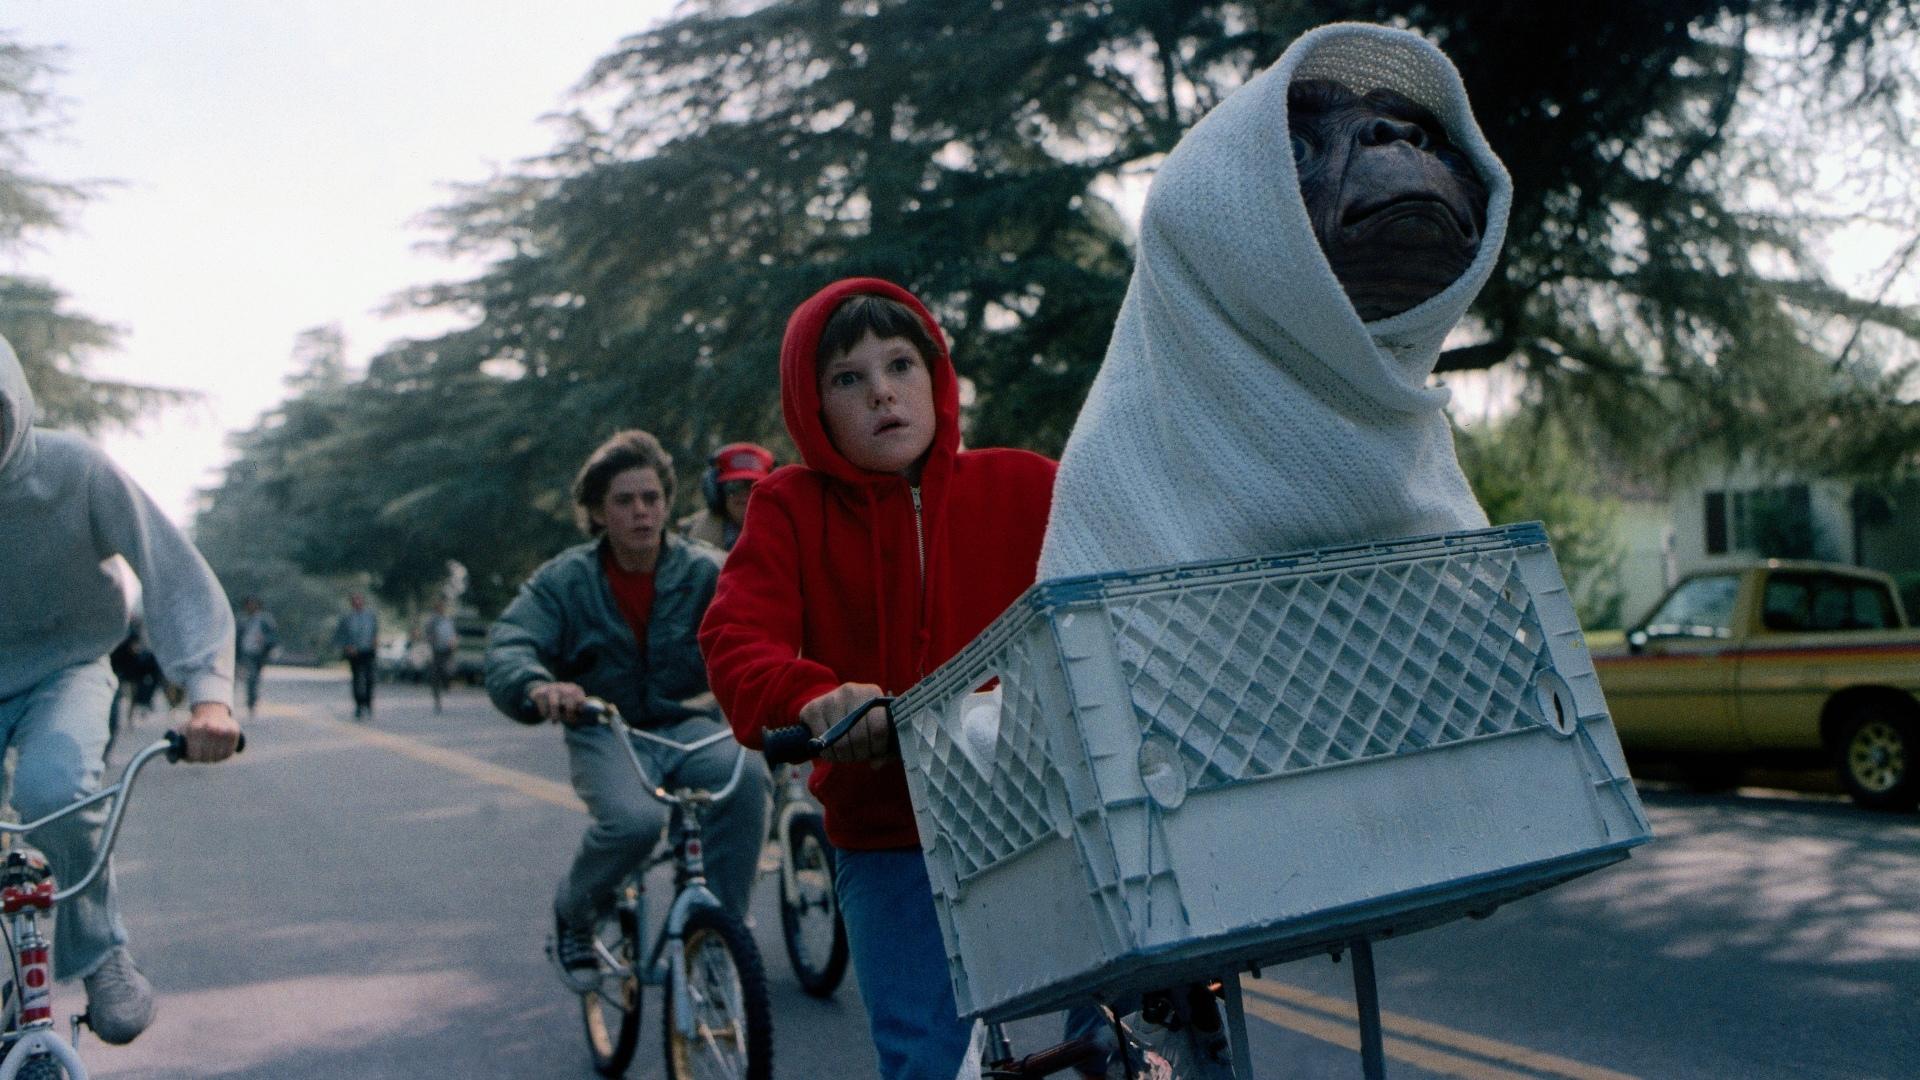 E.T. the Extra-Terrestrial download the new version for windows